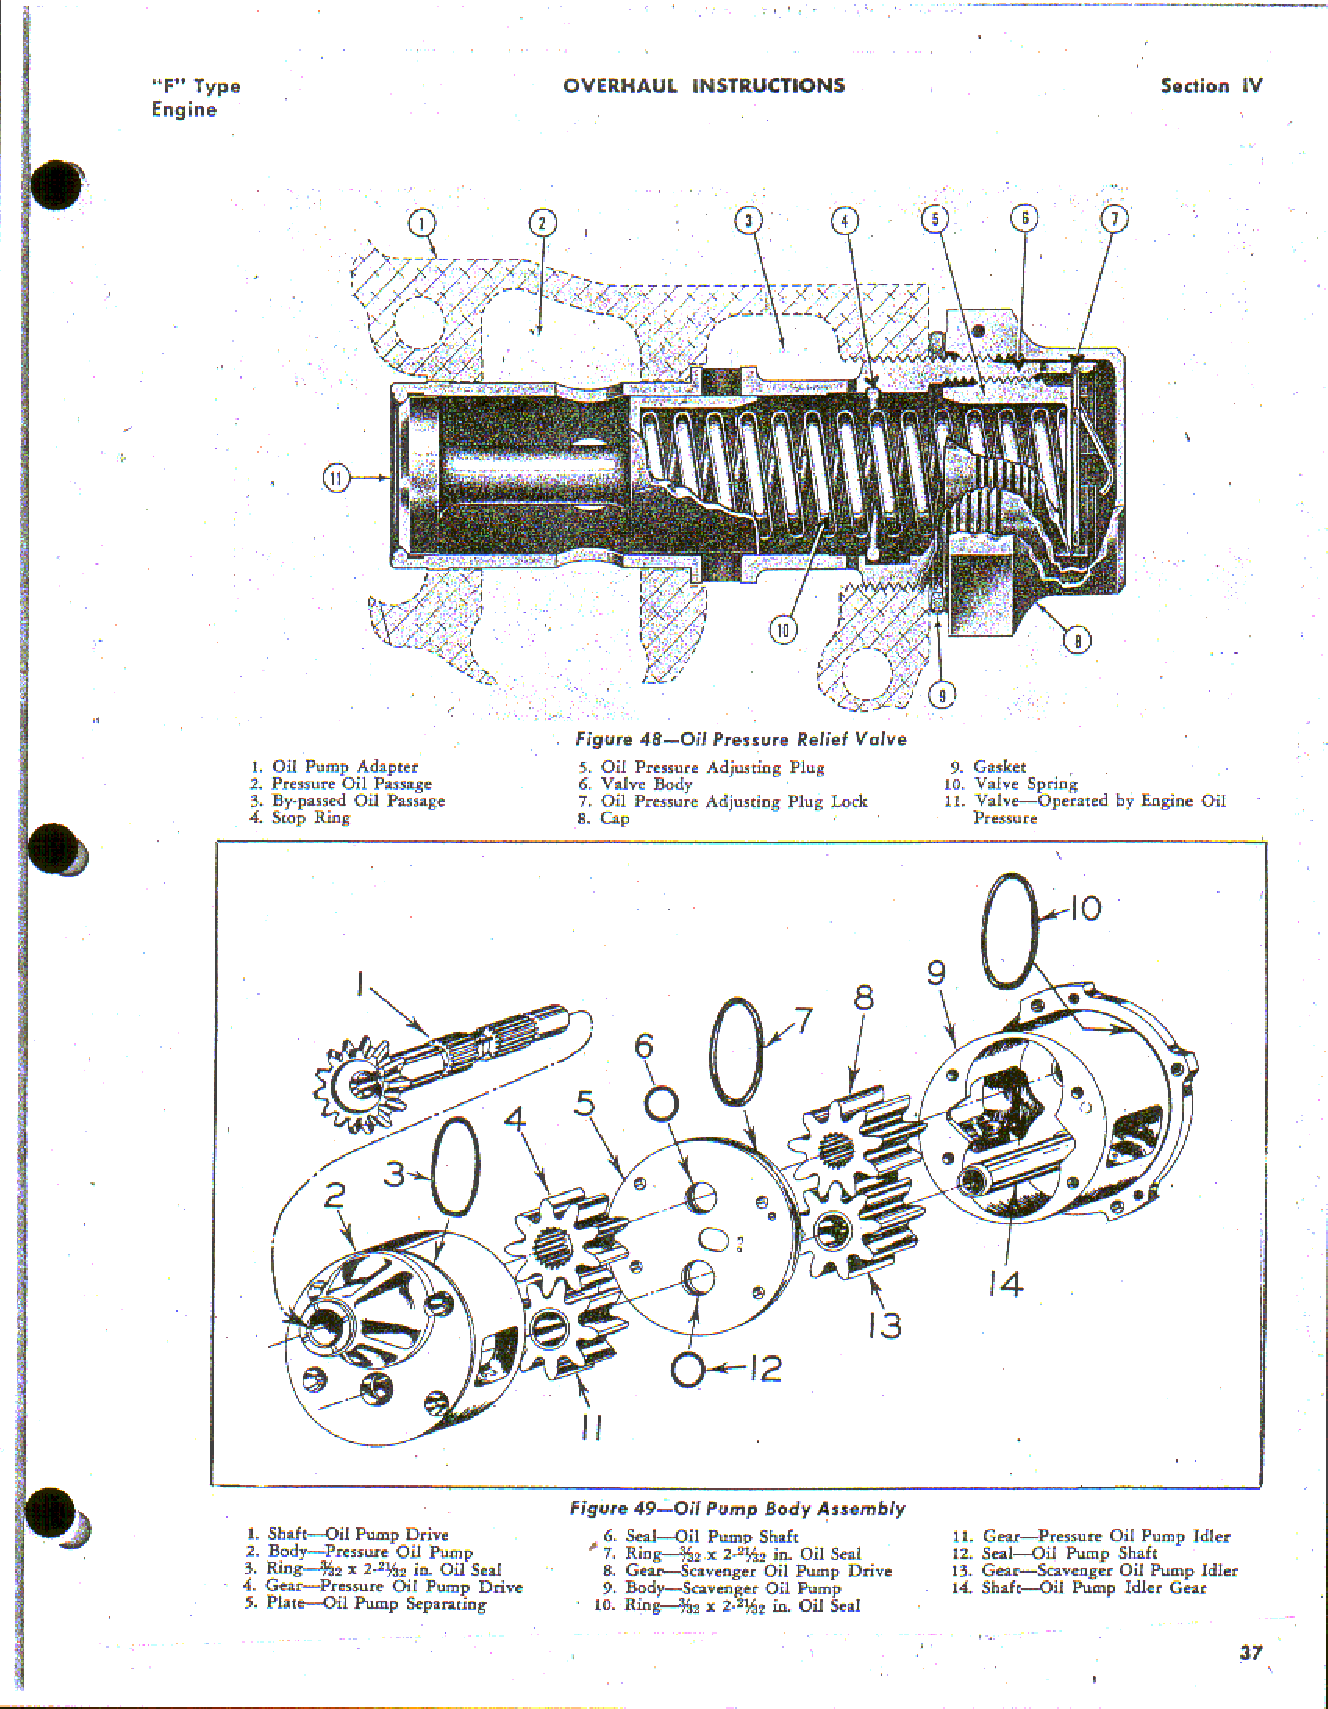 Sample page 44 from AirCorps Library document: Overhaul Bulletin - Allison Engine - V-1710-F